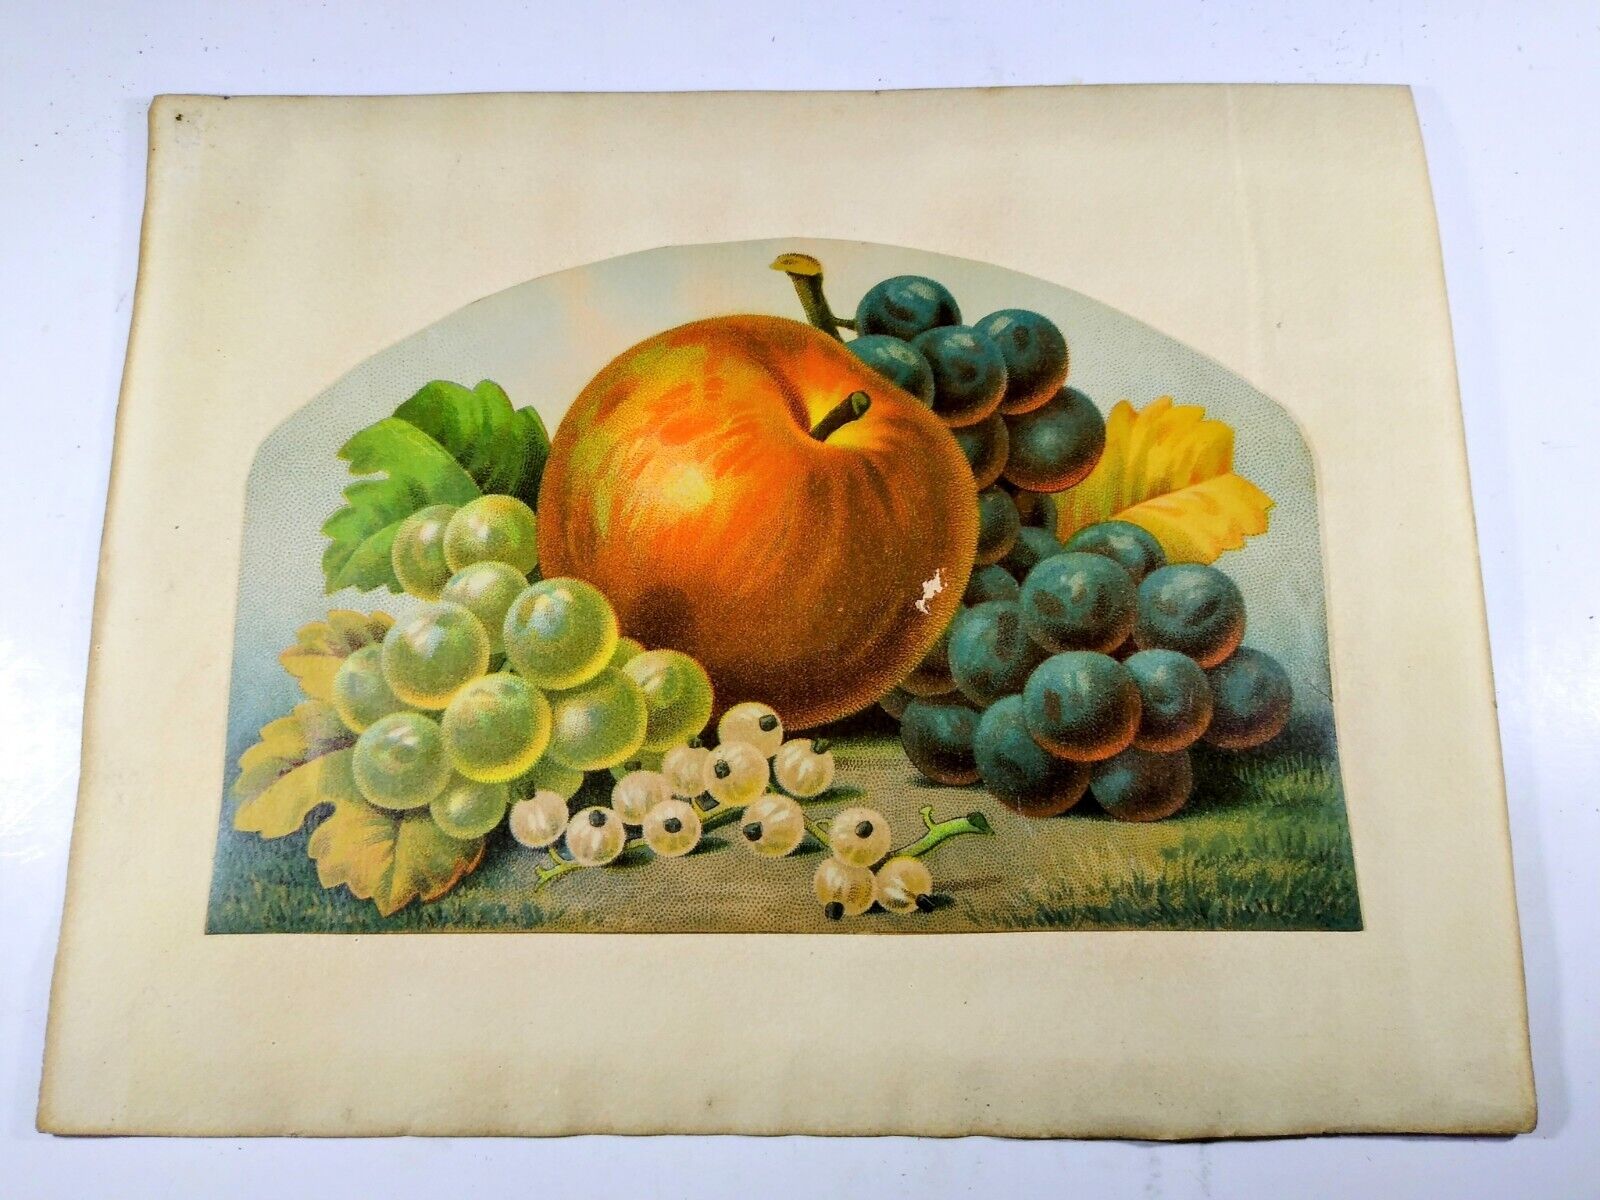 Antique Fruit Print, Probably 19th C. Lithograph - About 8x10\